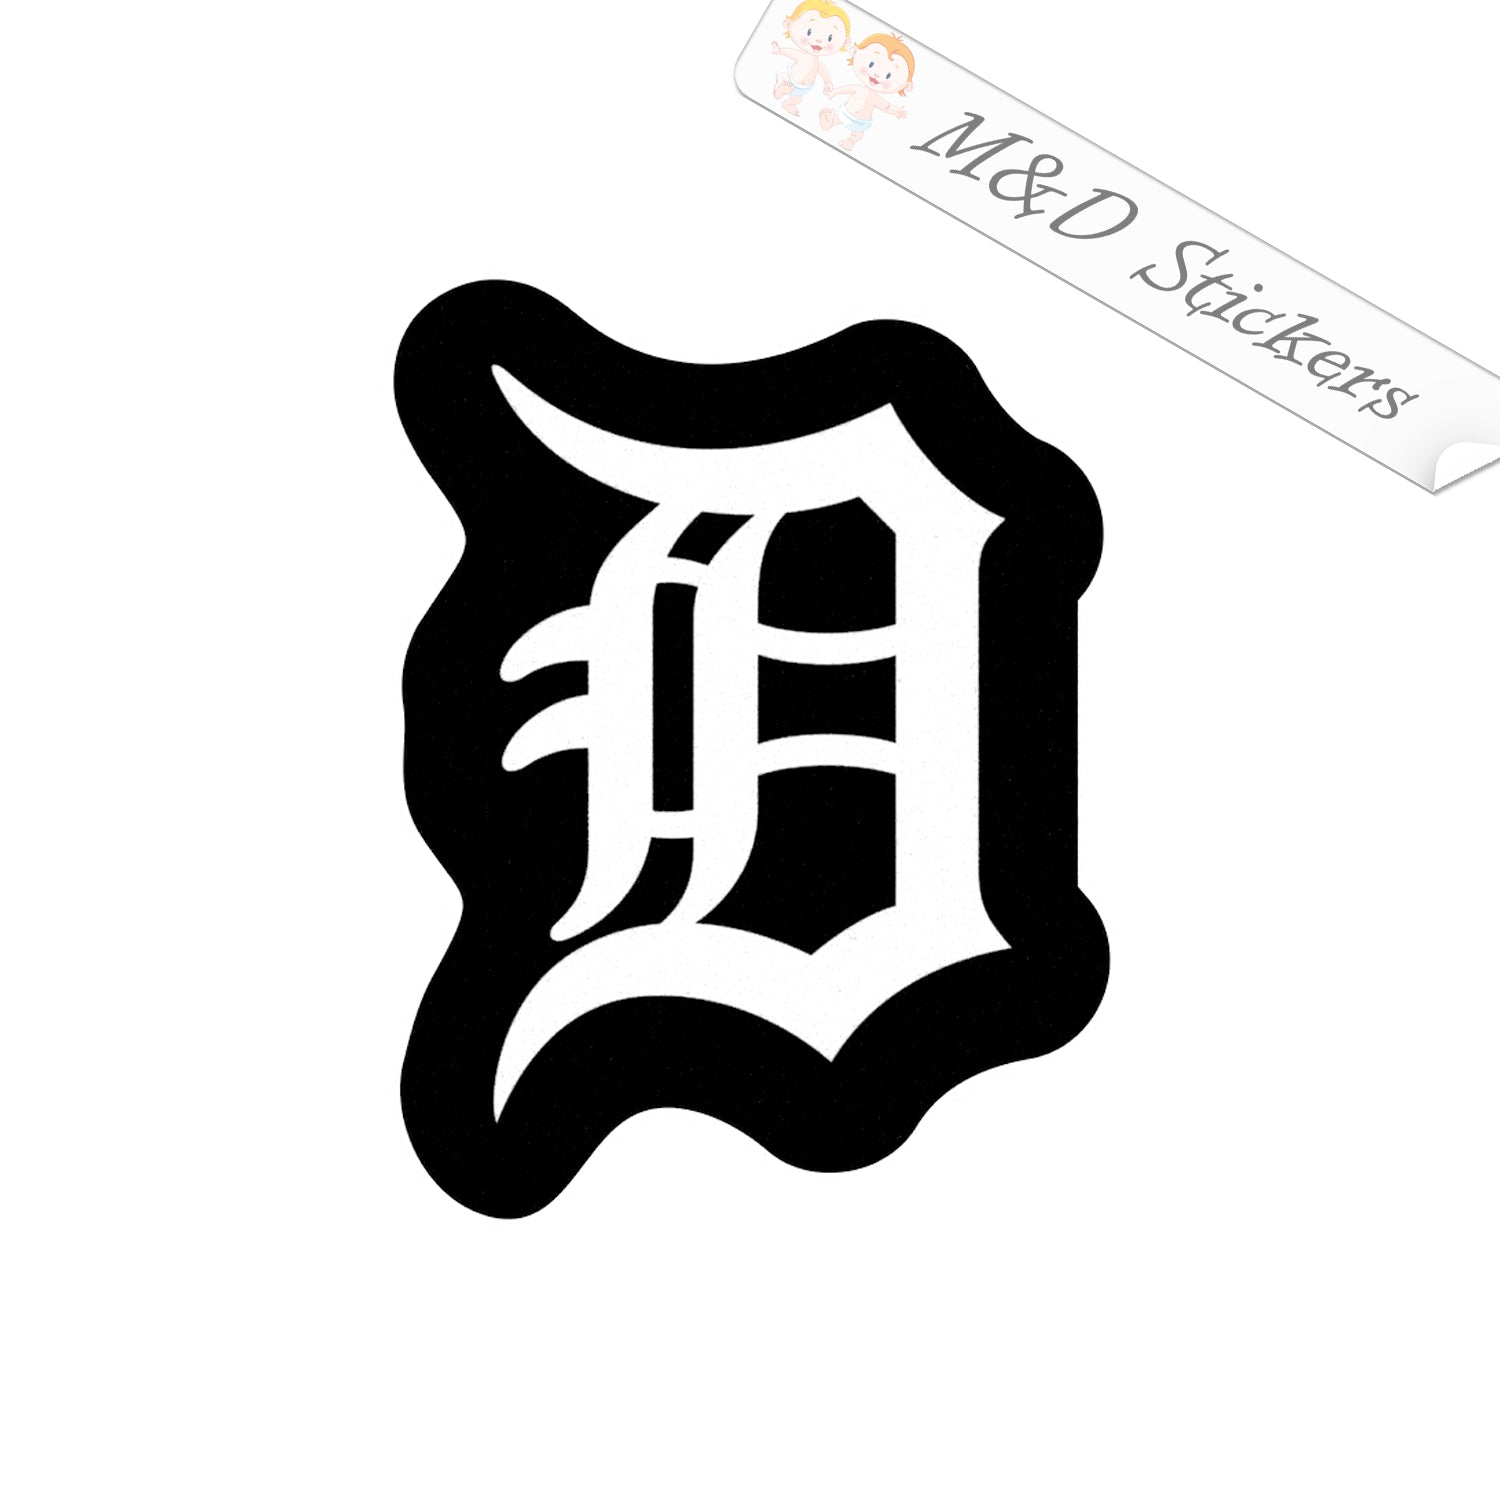 Detroit Tigers WinCraft 3x 4 Multi-Use Decal - Detroit City Sports